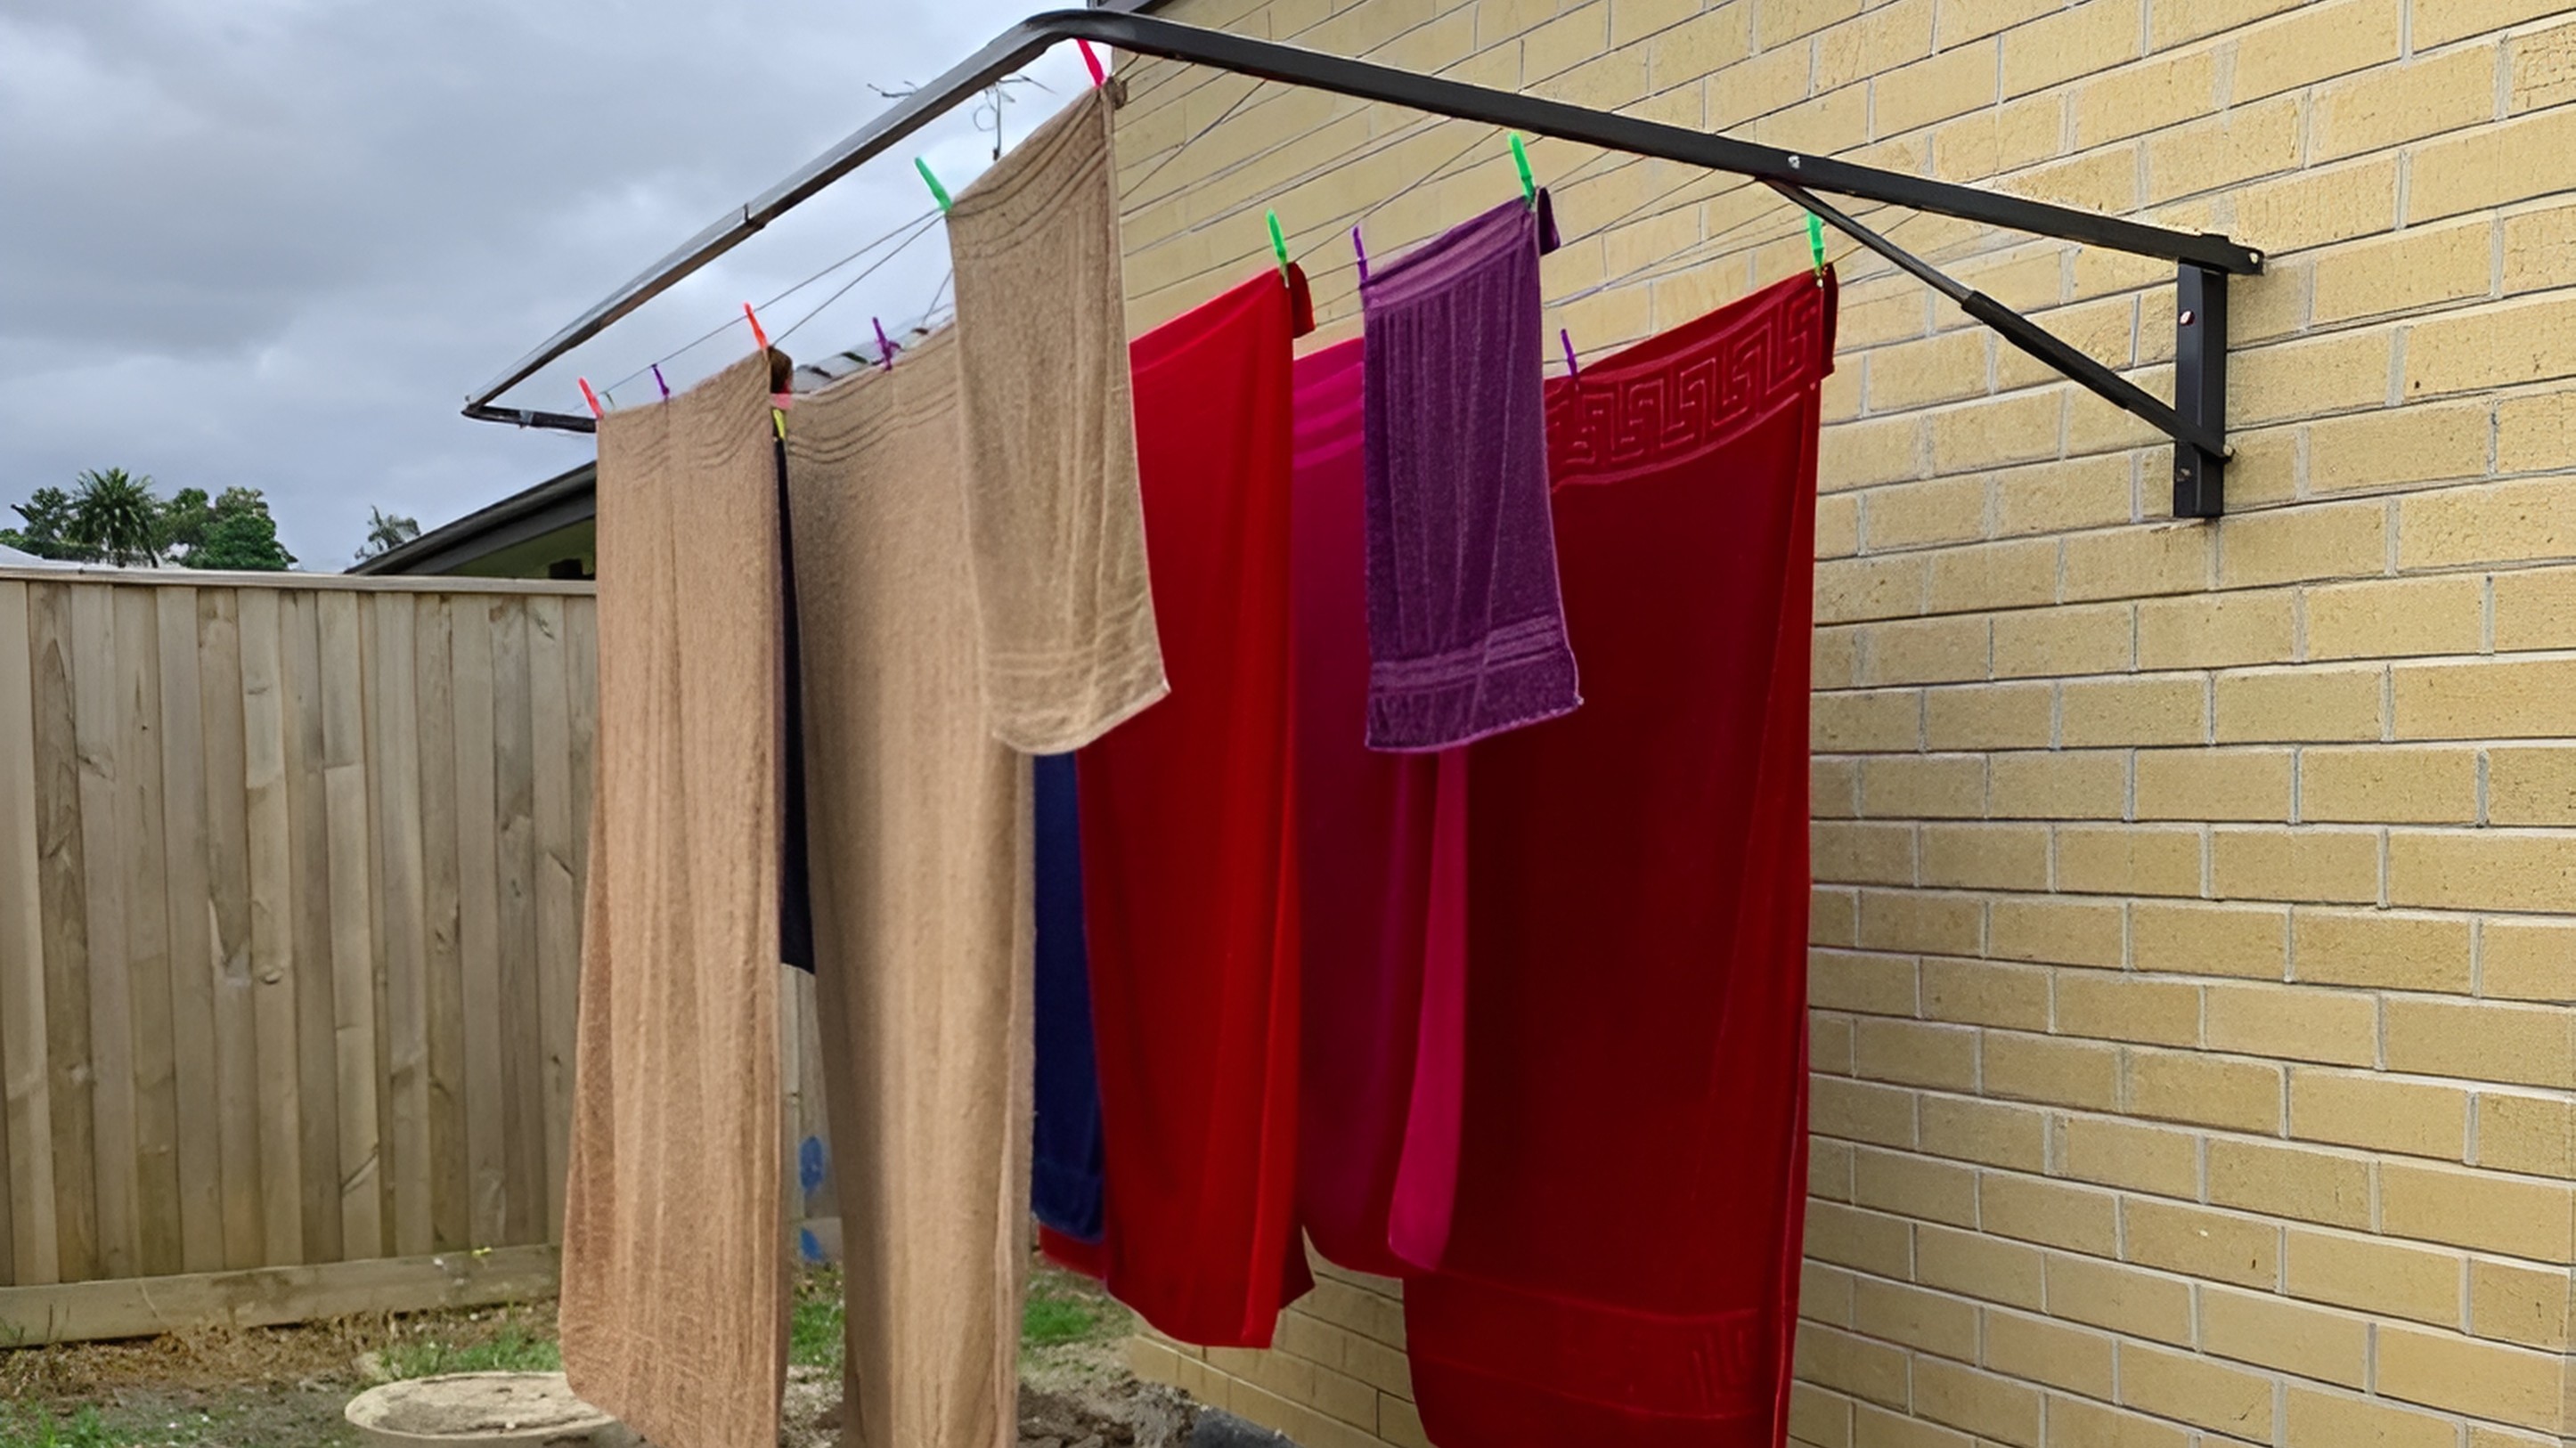 Wall Hung Clothes Line The Eco-Friendly Option: Sustainable Materials and Design